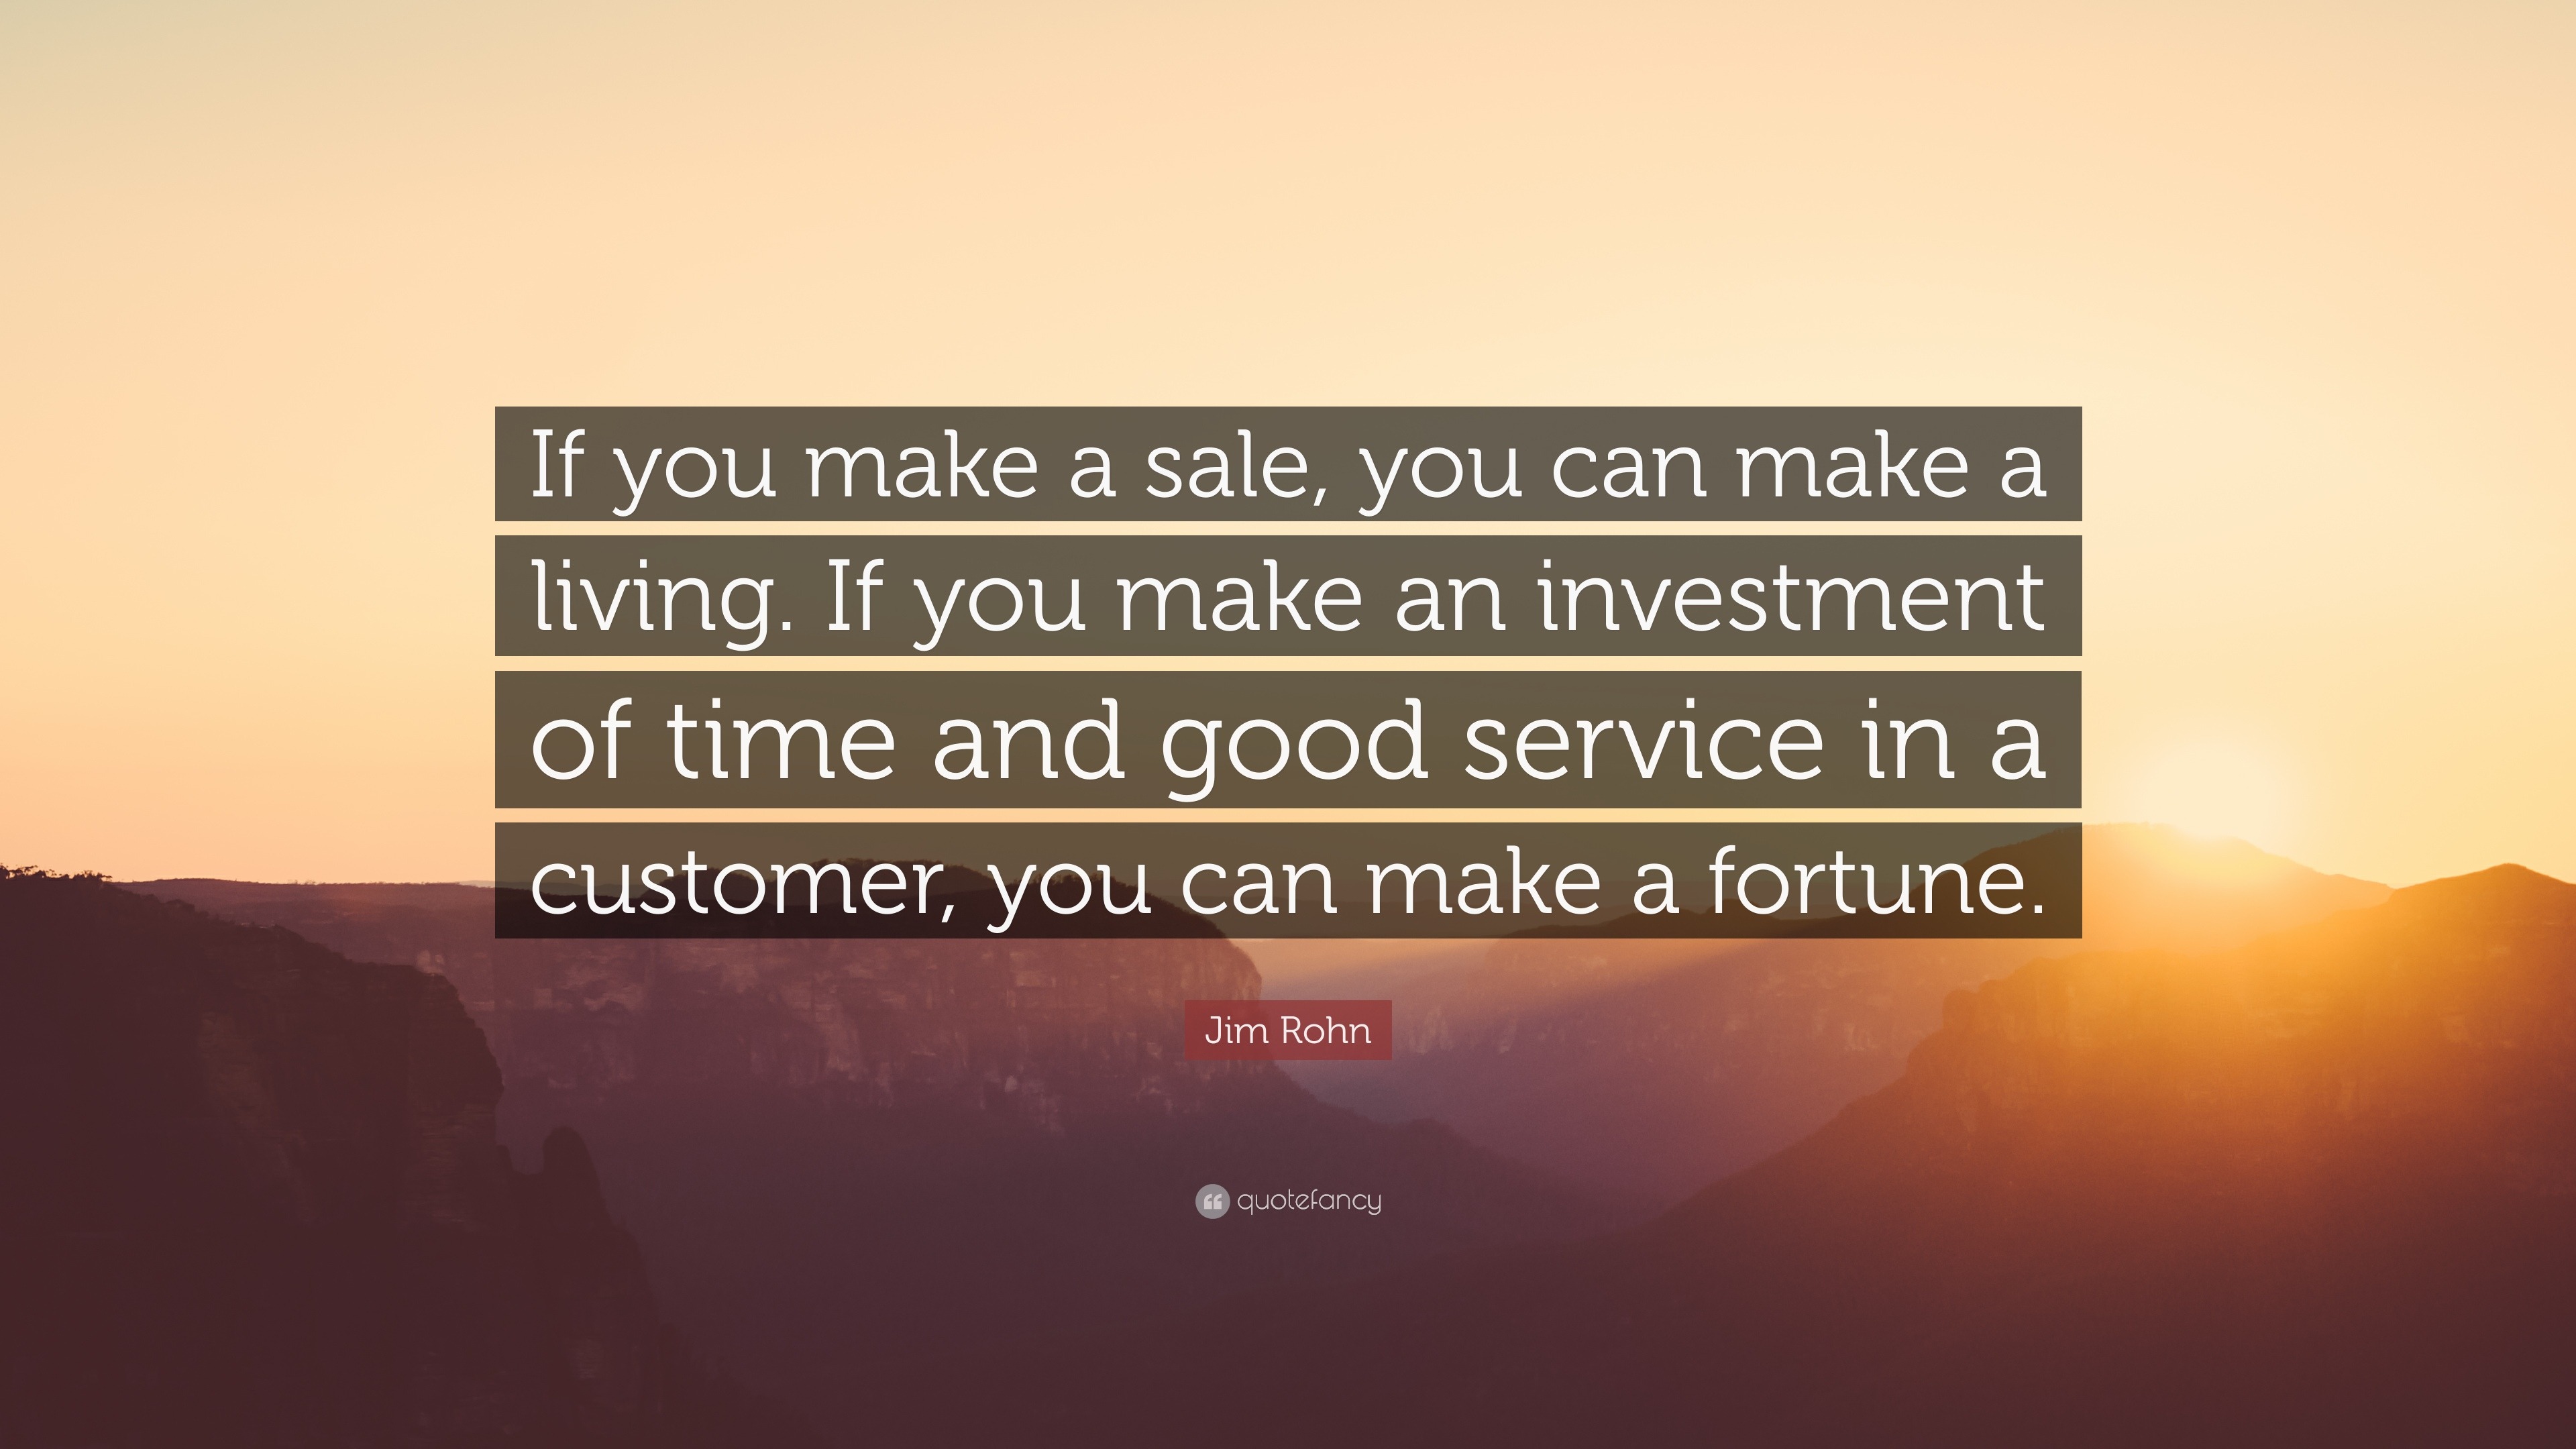 Jim Rohn Quote If You Make A Sale You Can Make A Living If You Make An Investment Of Time And Good Service In A Customer You Can Mak 12 Wallpapers Quotefancy